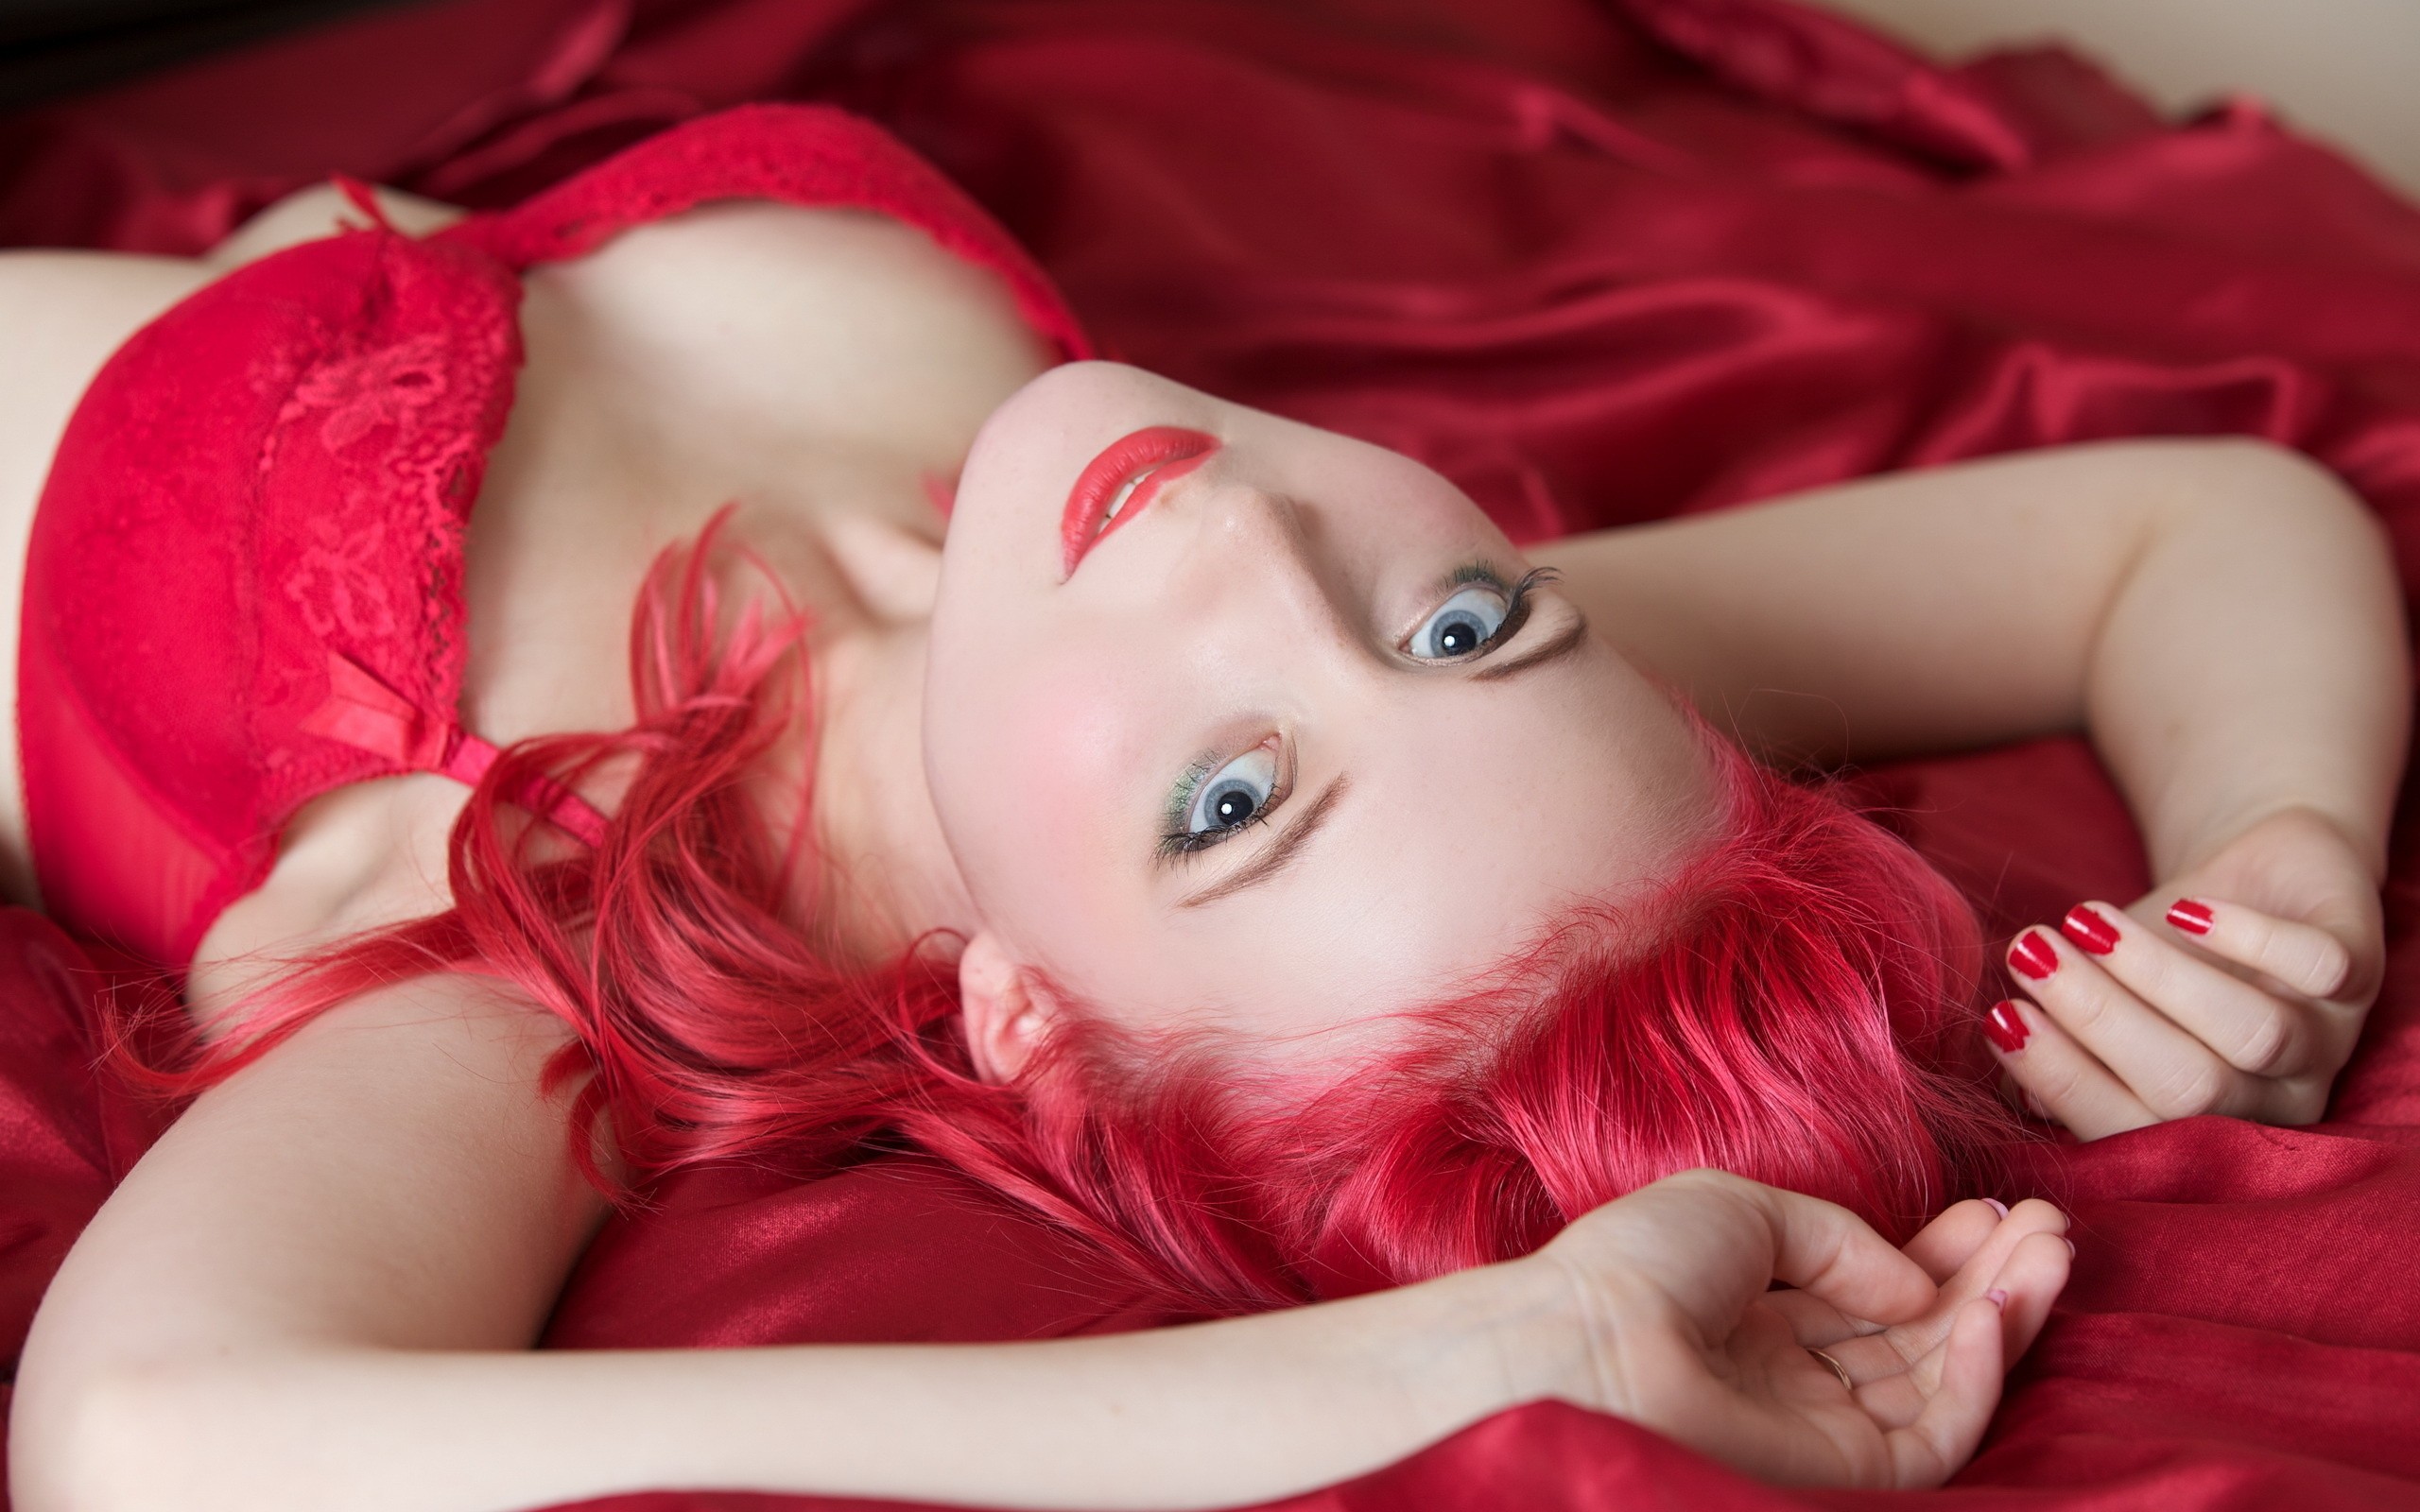 redhead red lingerie painted nails blue eyes push-up bras in bed pink hair red...